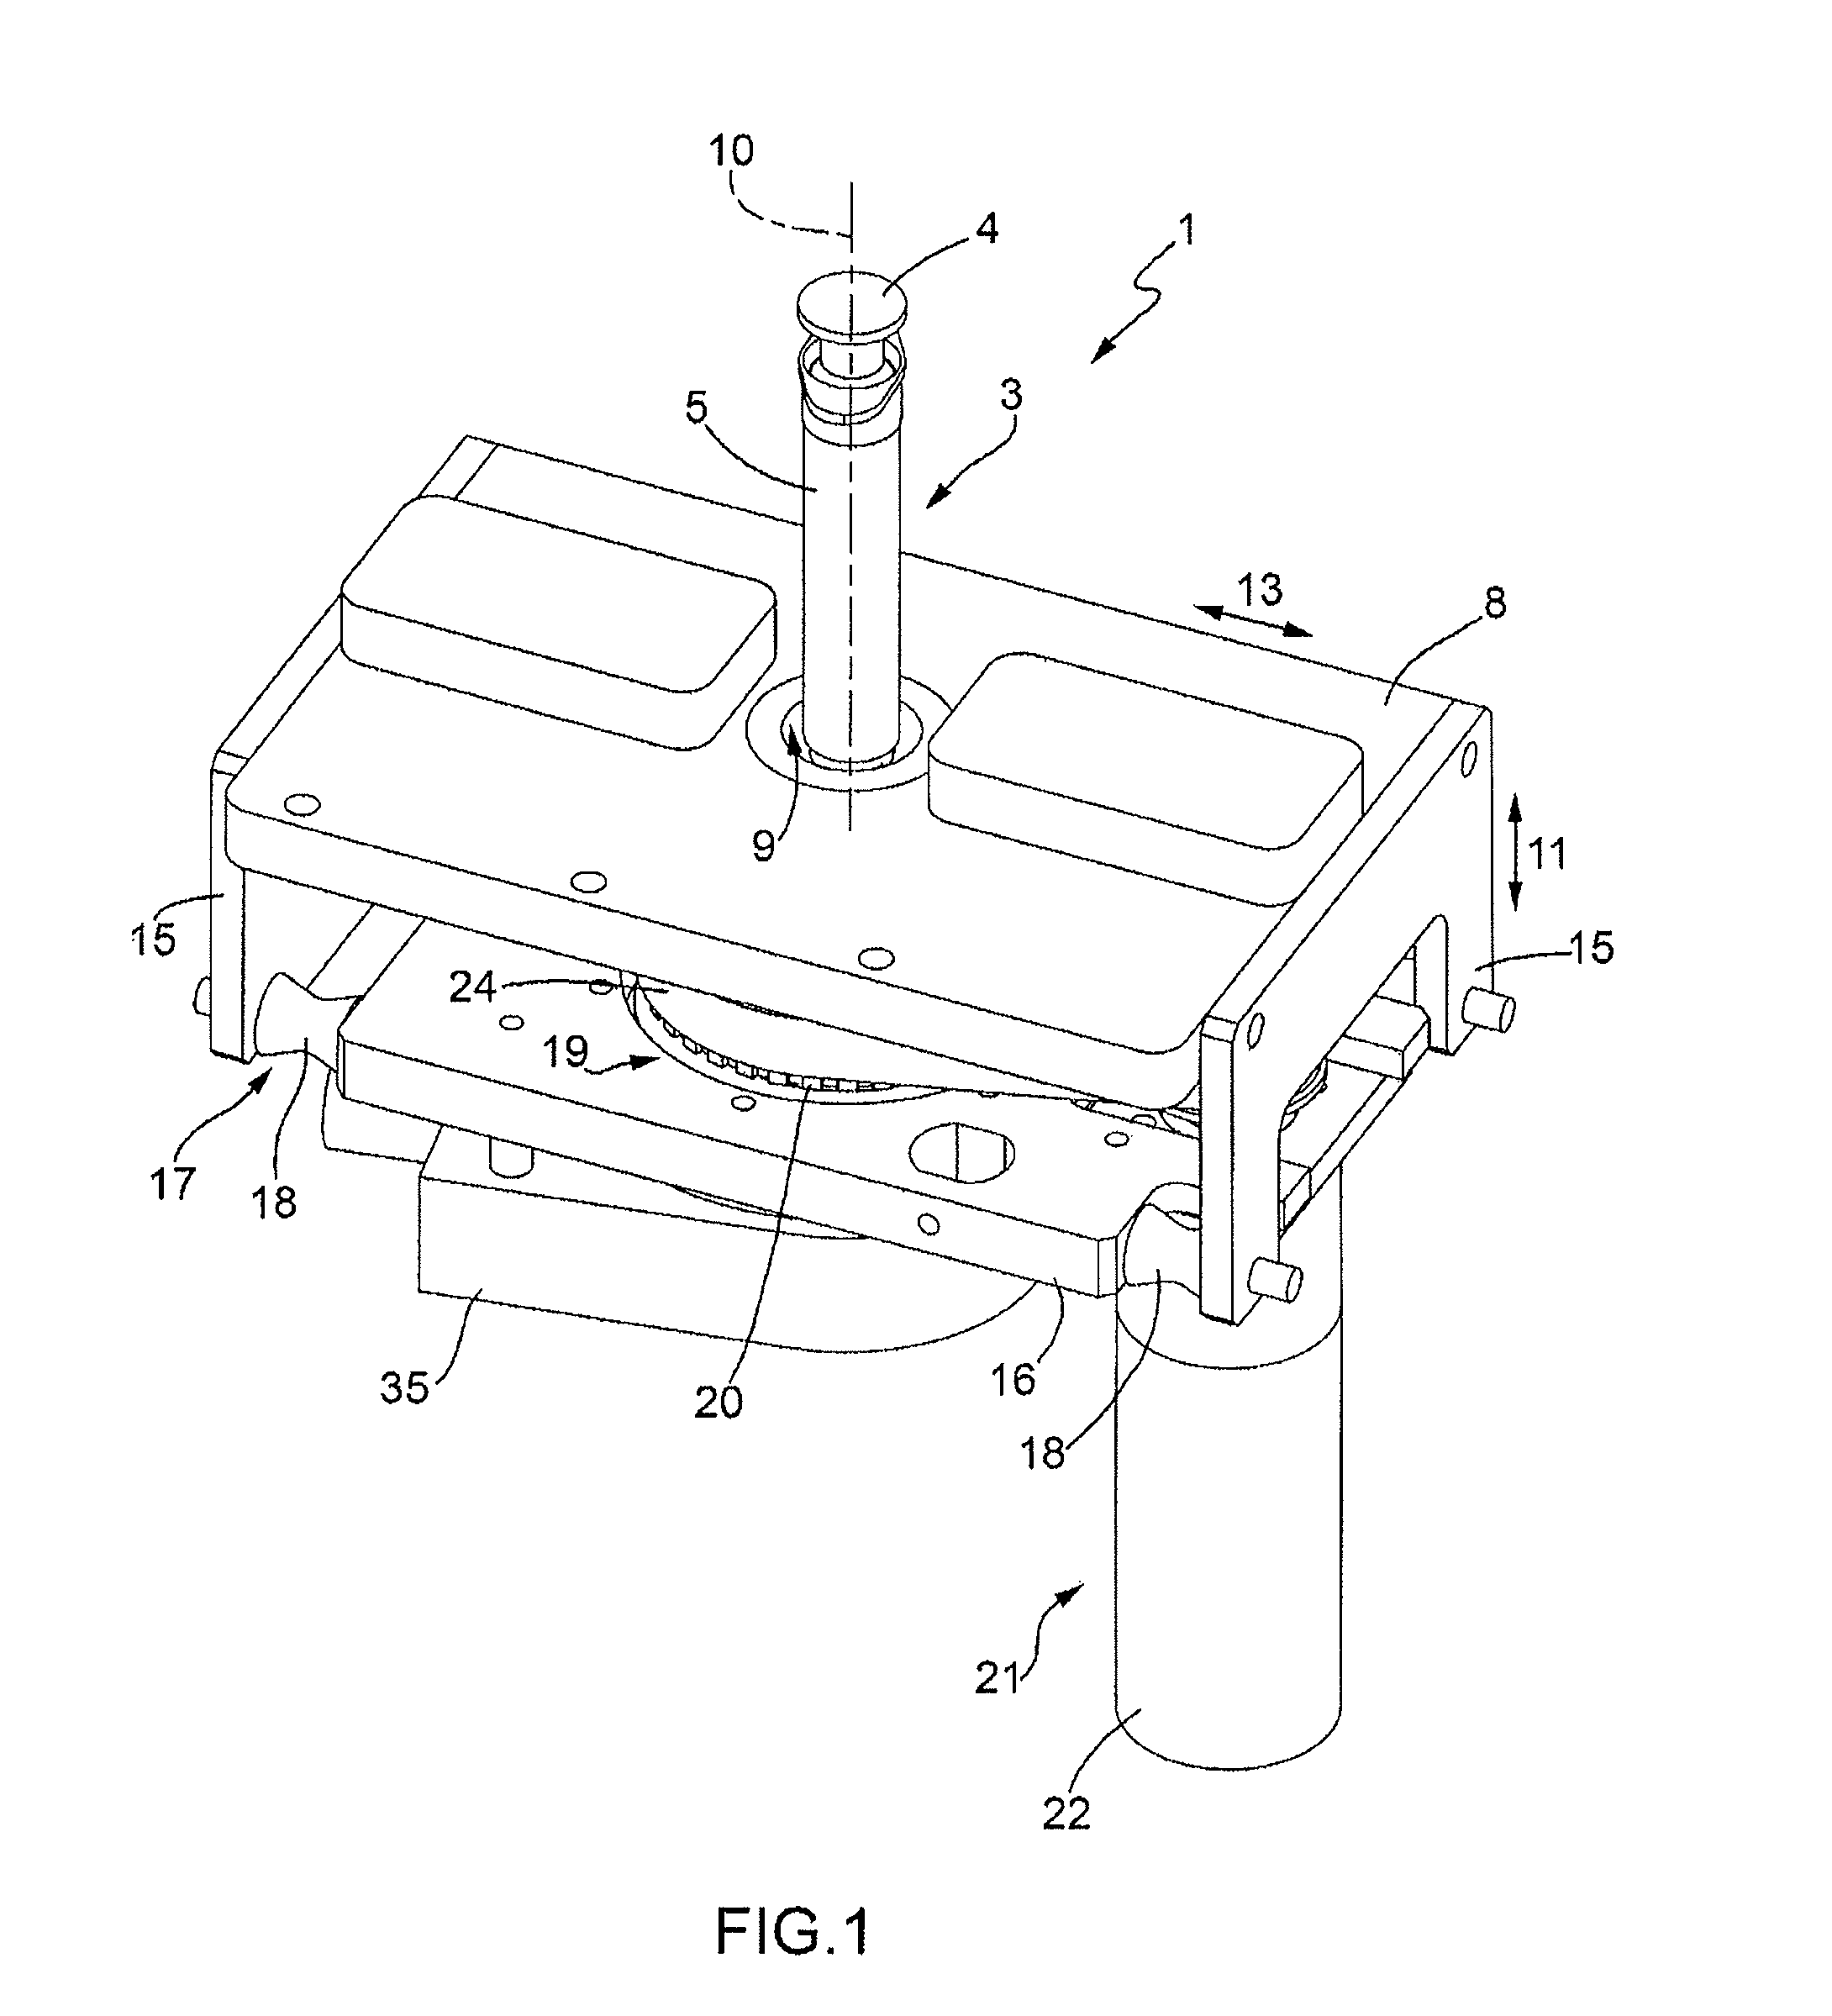 Apparatus for the removal of needles of syringes